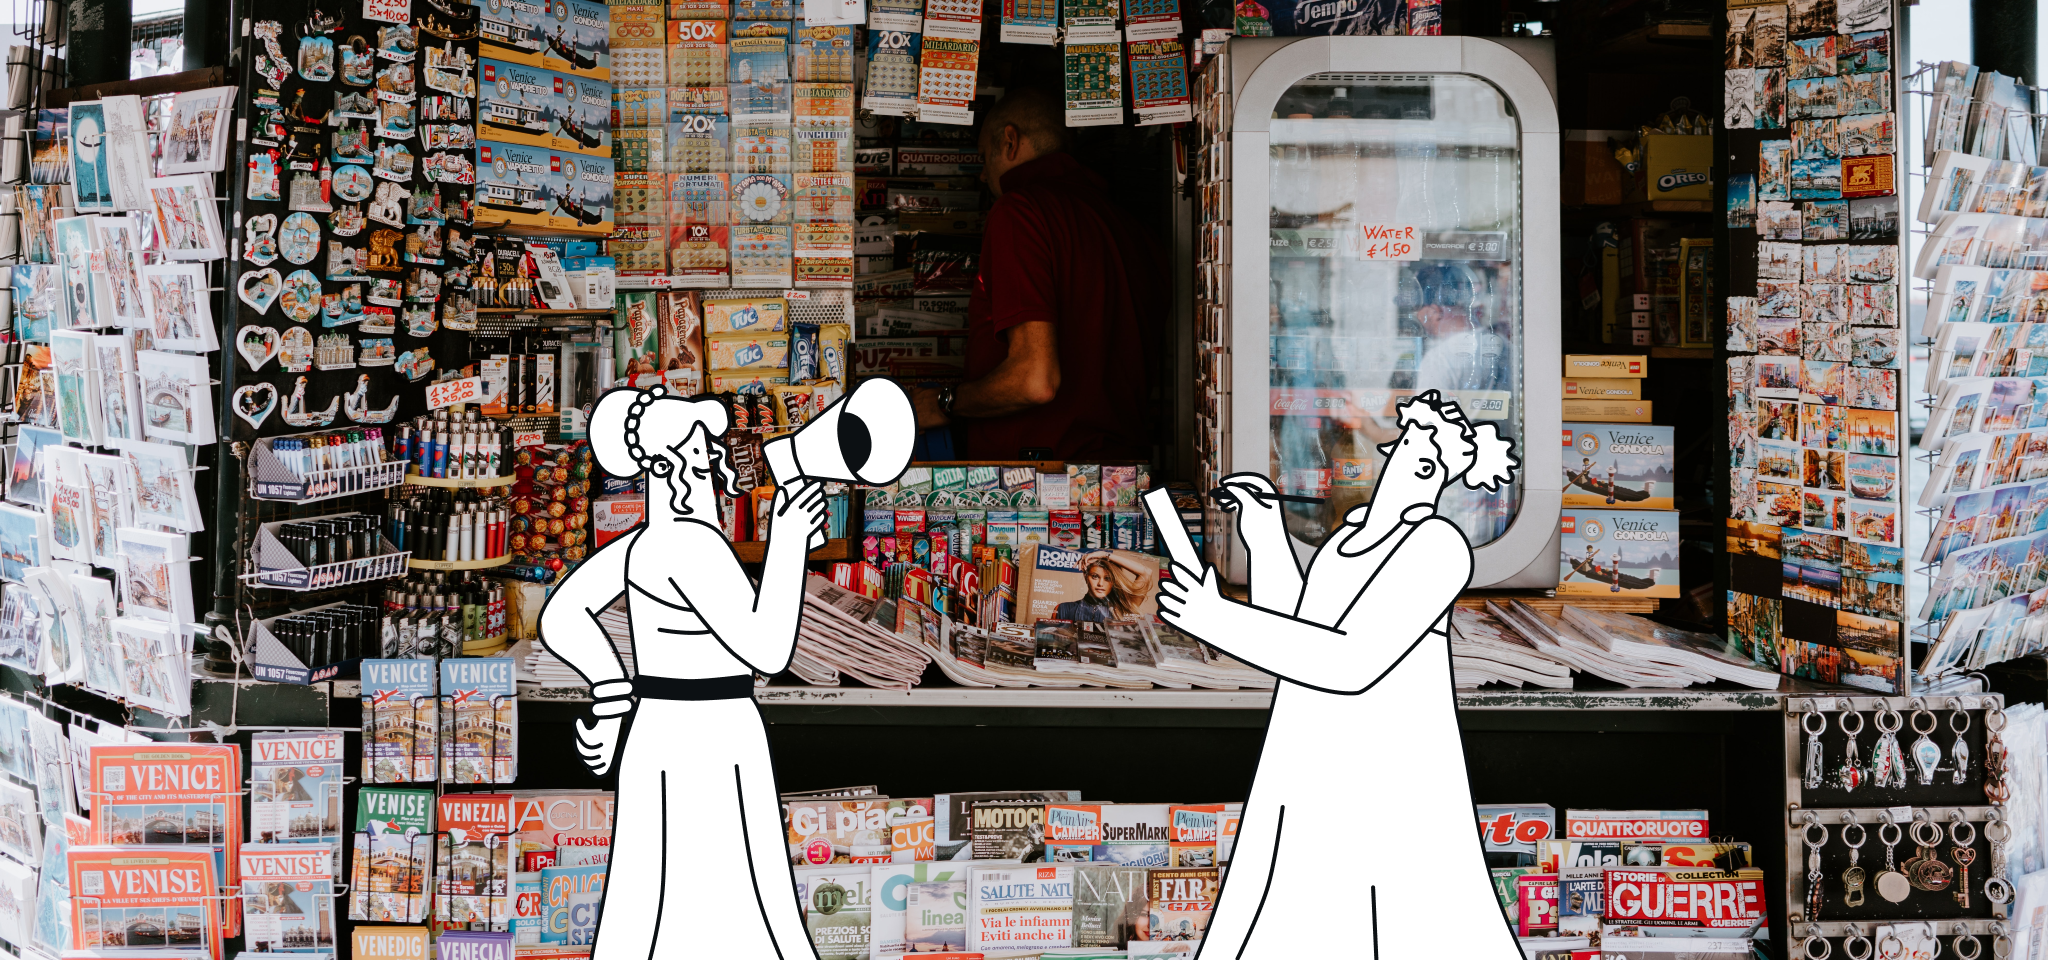 Illustration of two Greek goddesses in front of a newspaper stand